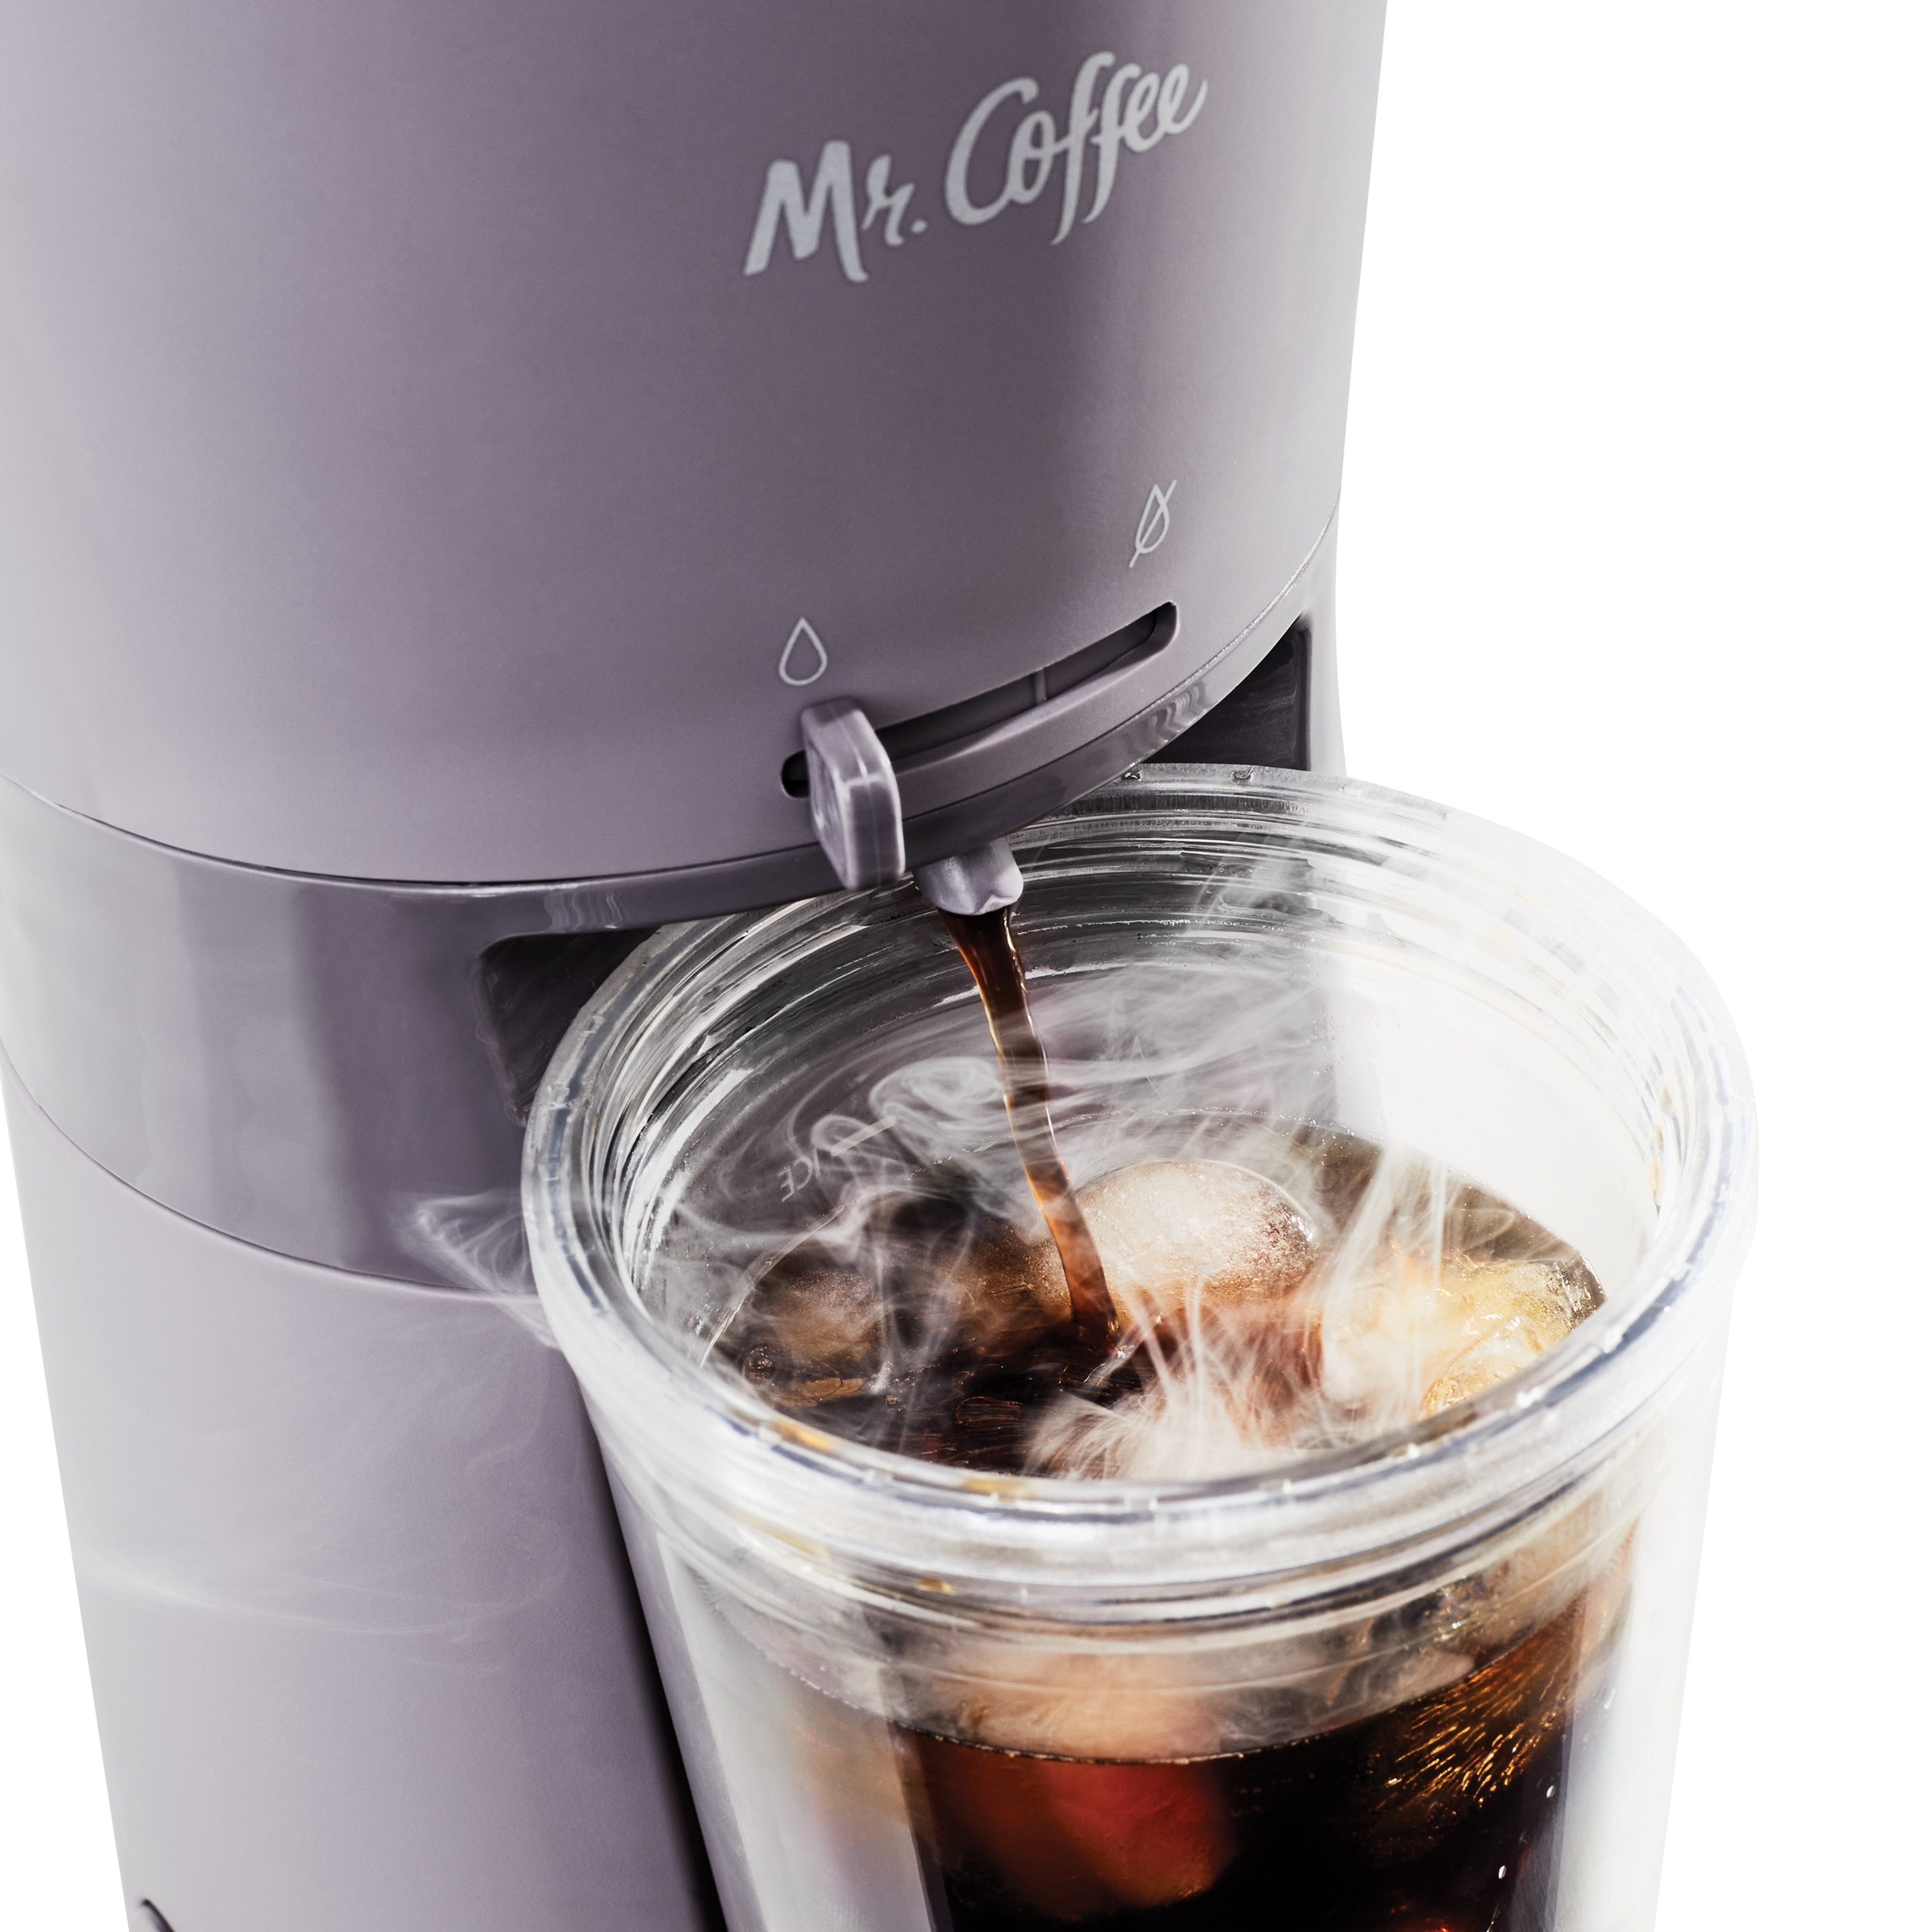 https://ak1.ostkcdn.com/images/products/is/images/direct/341b28d8070c57f0a9431044cb7b39394f332d27/Mr.-Coffee%C2%AE-Iced%E2%84%A2-Coffee-Maker-with-Reusable-Tumbler-and-Coffee-Filter%2C-Lavender.jpg